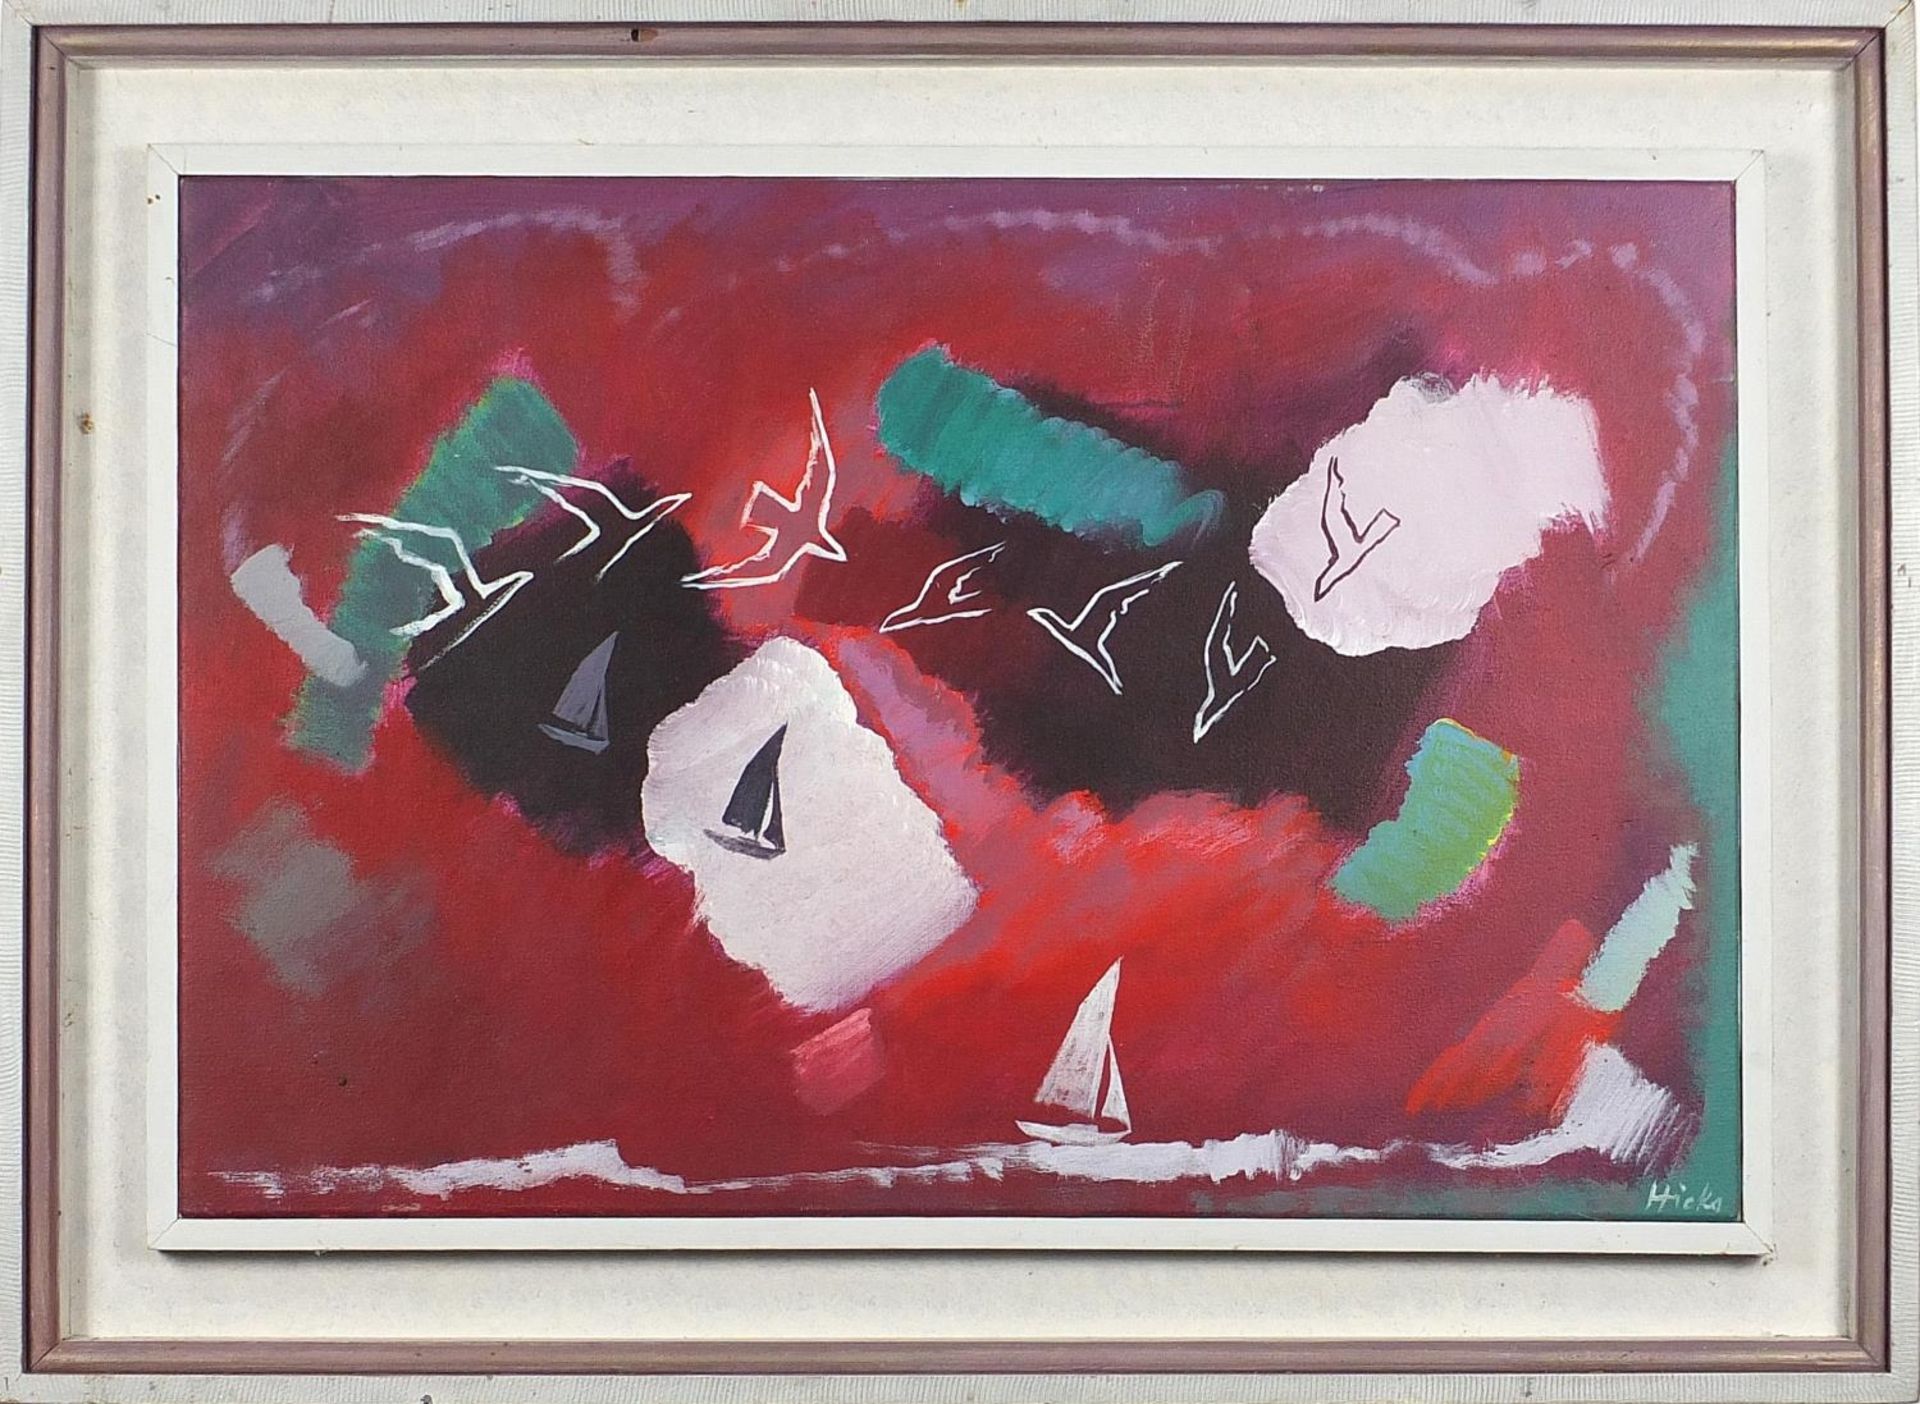 Philip Hicks '86 - Sailing by sunset: Gara, acrylic on canvas, mounted and framed, 76cm x 50.5cm - Image 2 of 5